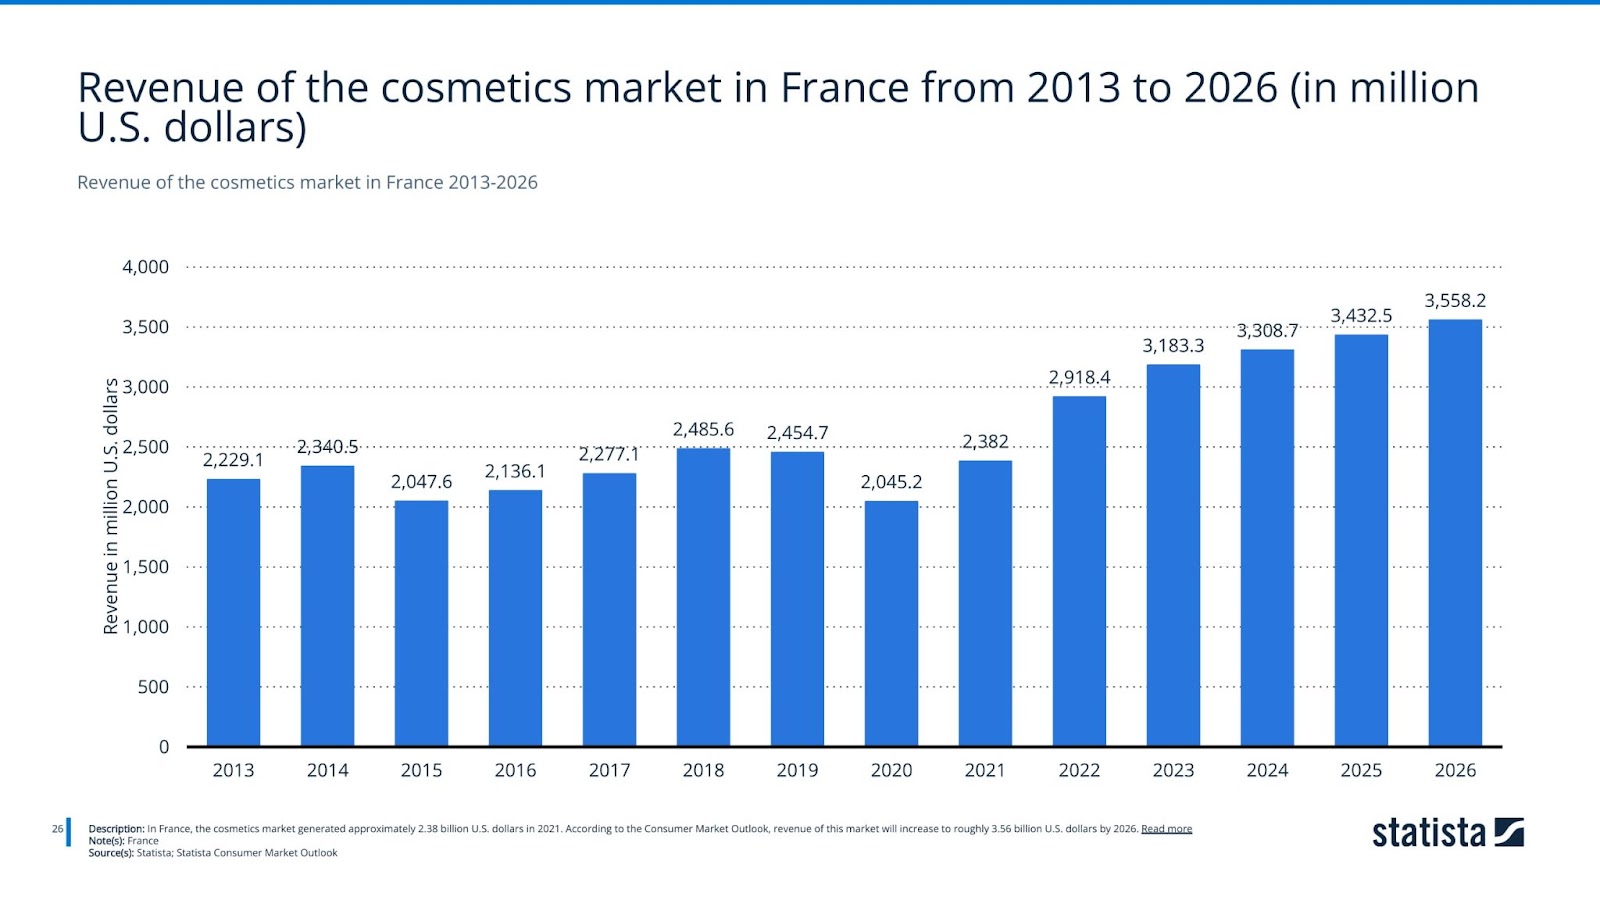 Revenue of the cosmetics market in France 2013-2026